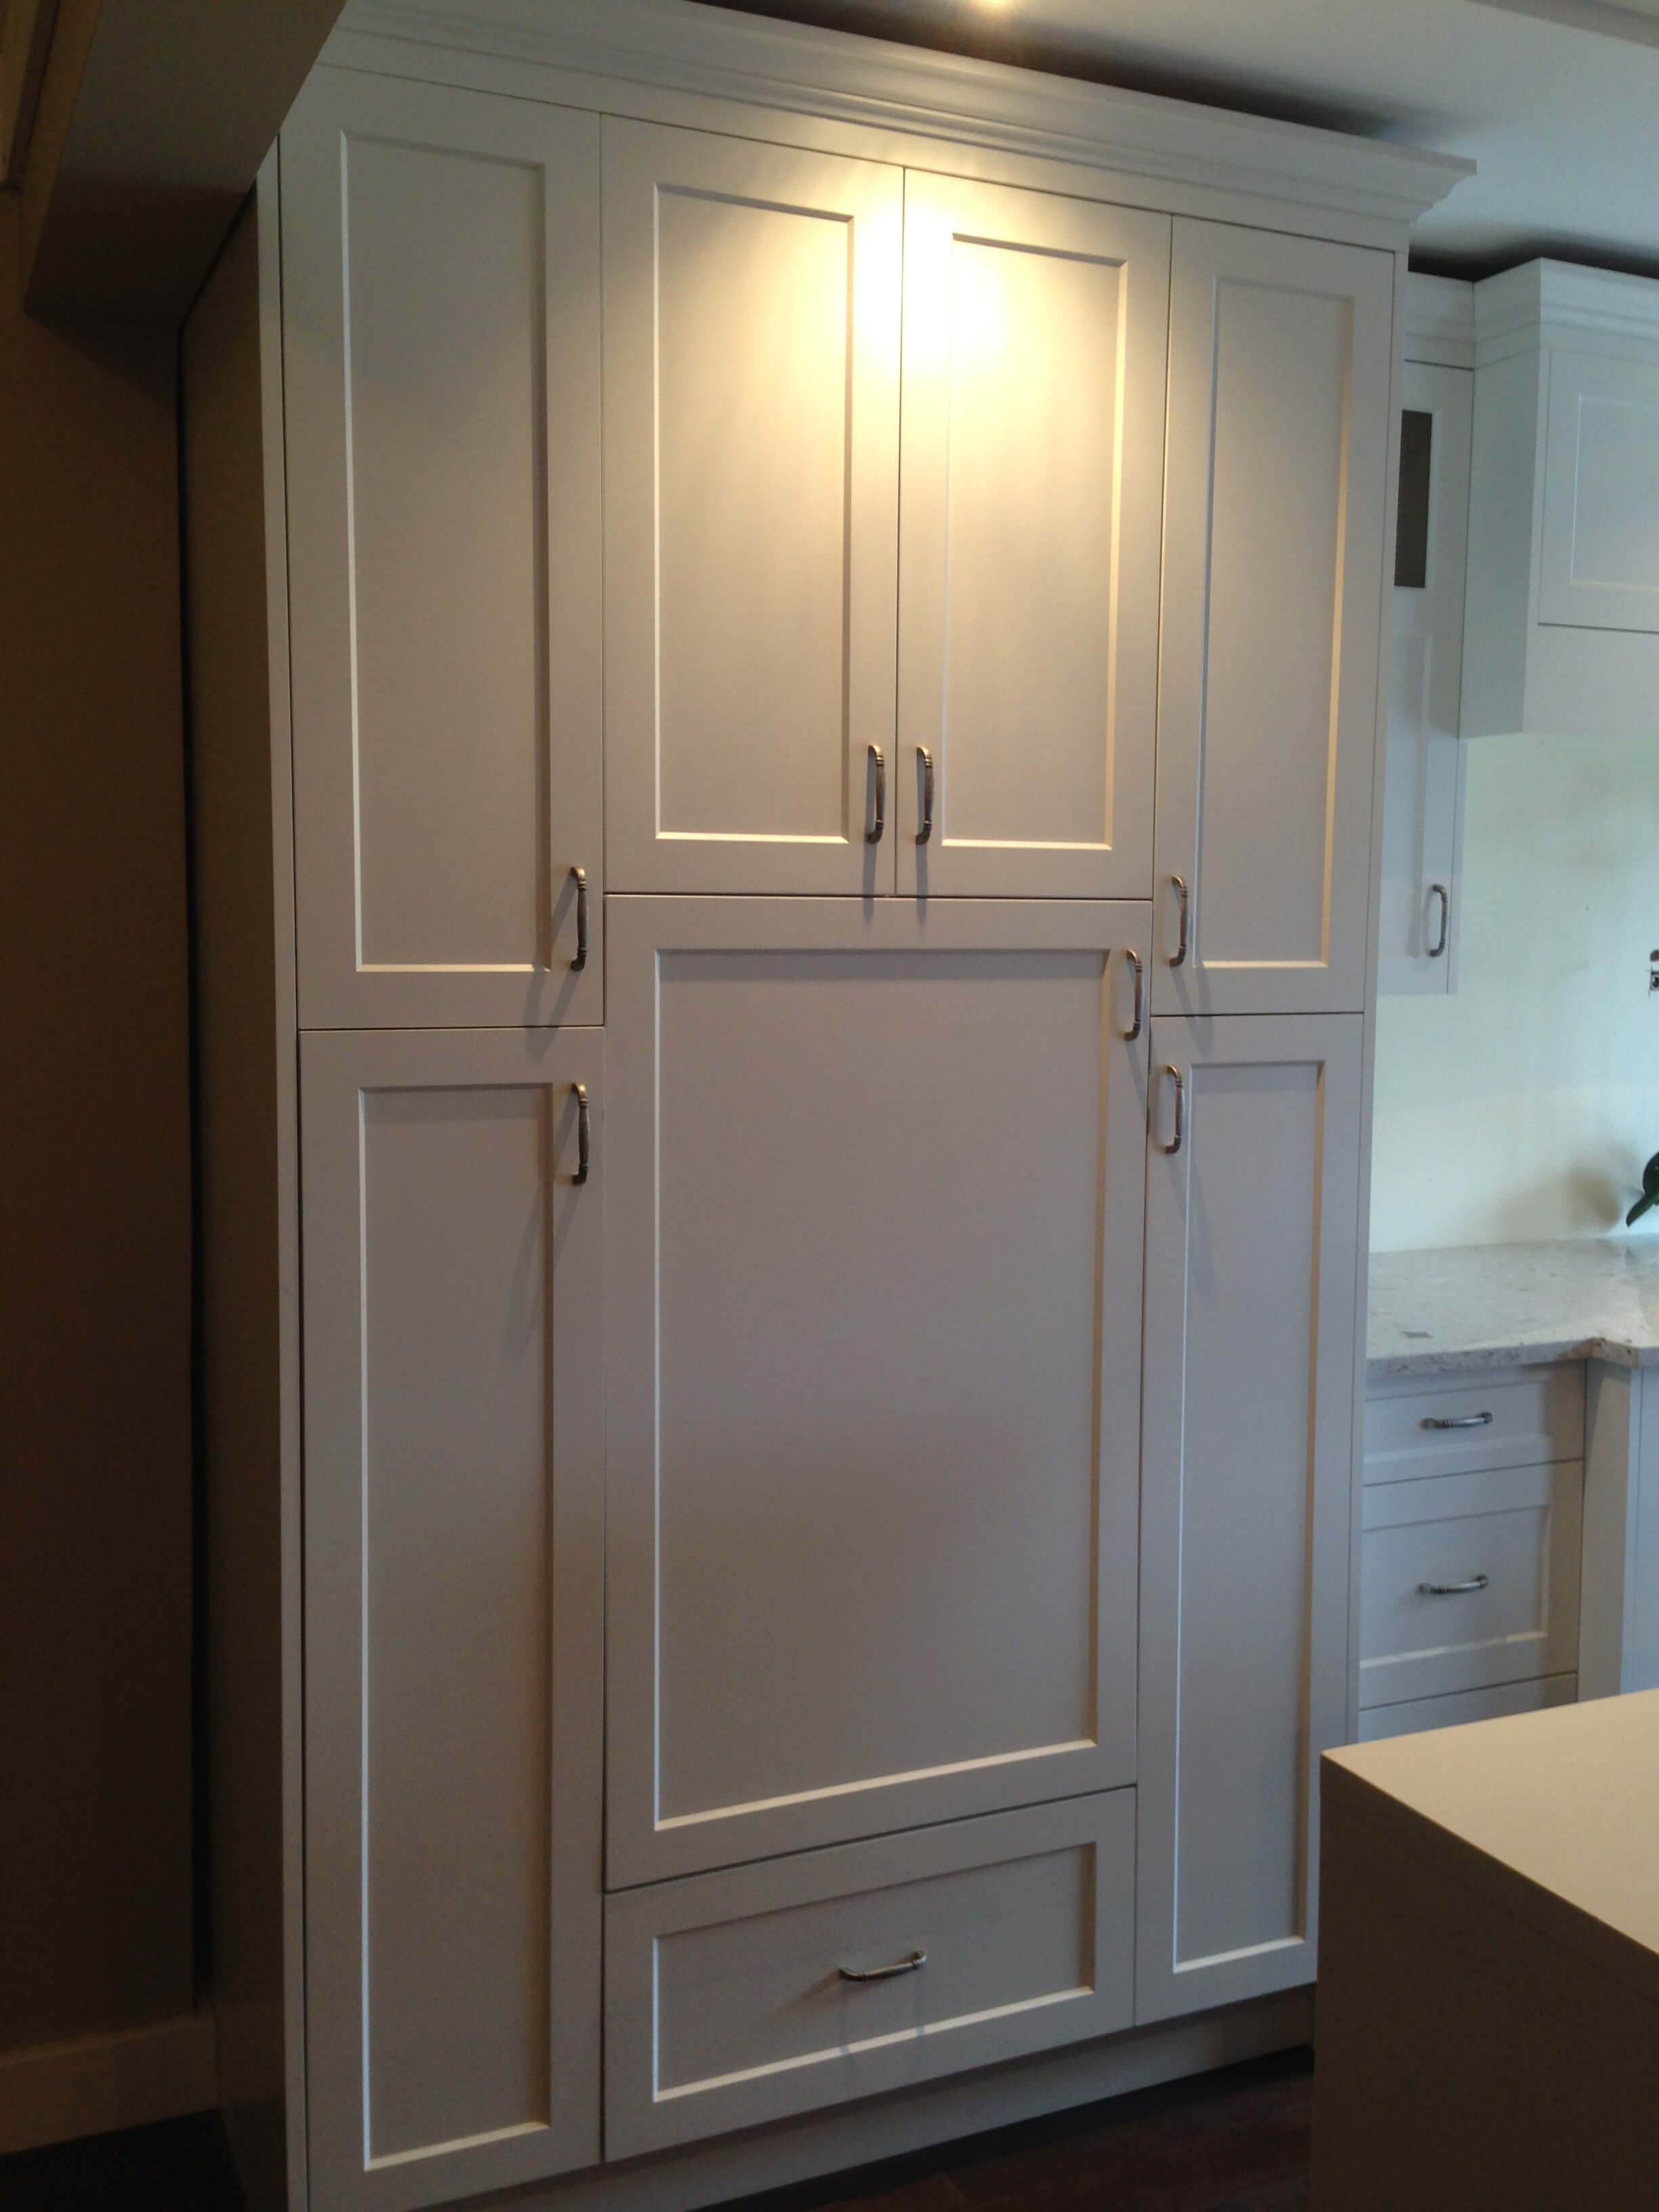 Kitchen Pantry Cabinet Burnaby - New Showroom Displays